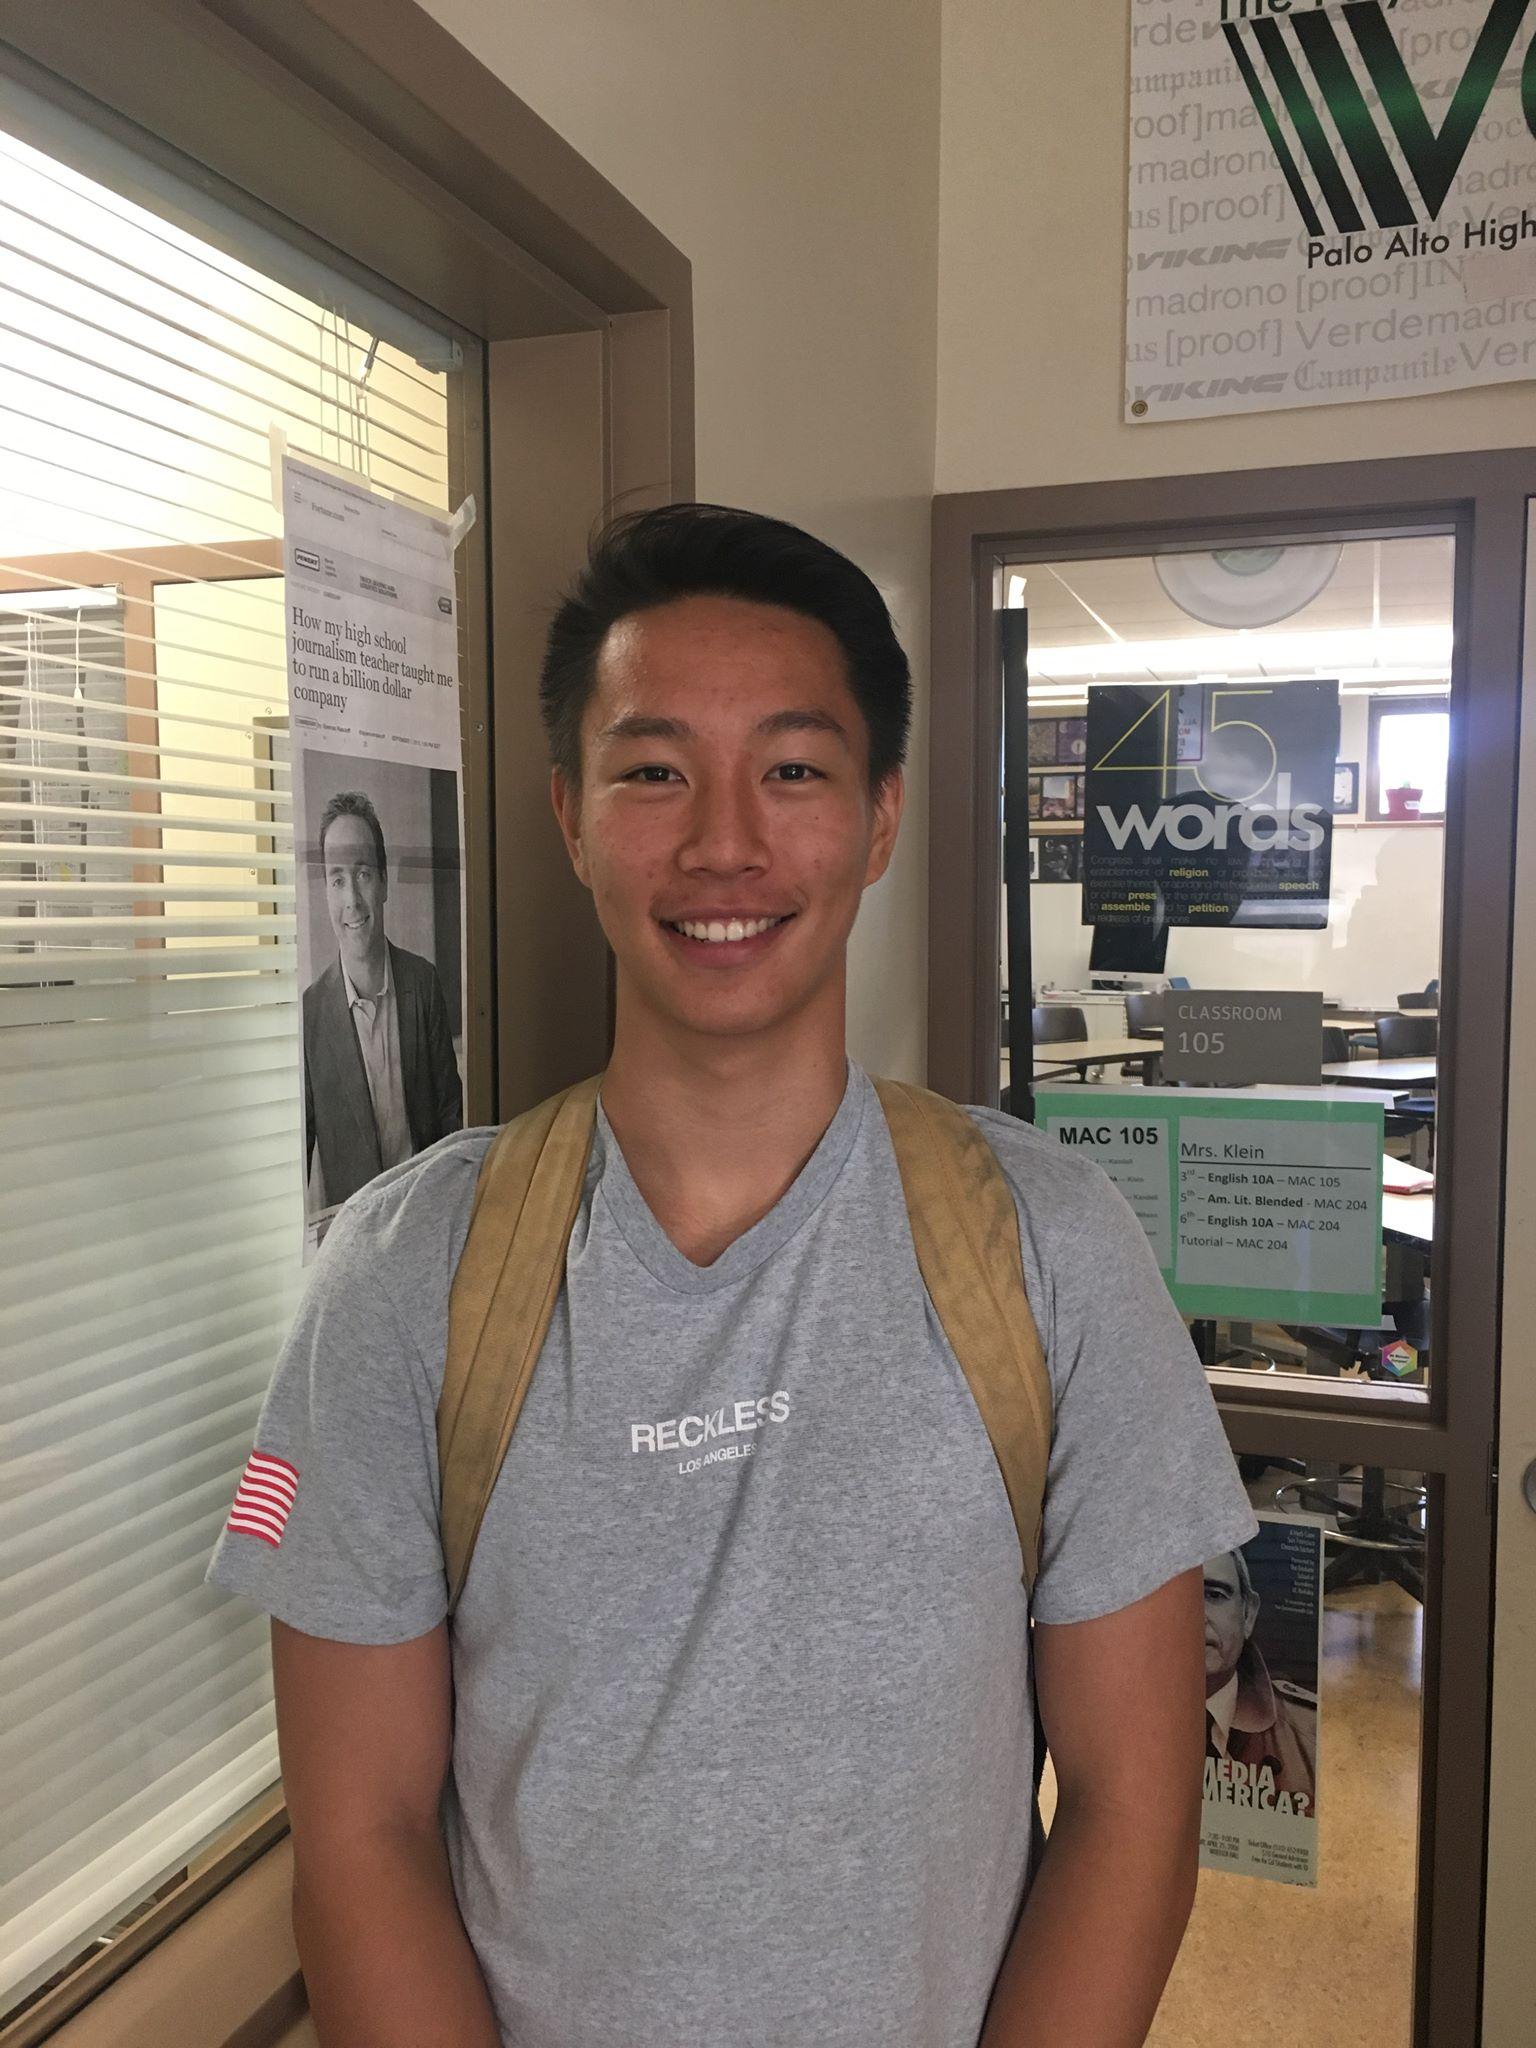 Senior Nicholas Zhao, one of the top members of the deca club, finished 3rd place in a state accounting competition last year. He has been in the club since his freshmen year and his involvement in finance clubs outside of school have increased his interest in the subject. "Finance's intersection with technology is what really interests and draws me in to its field," said Zhao. Photo: Marvin Zou